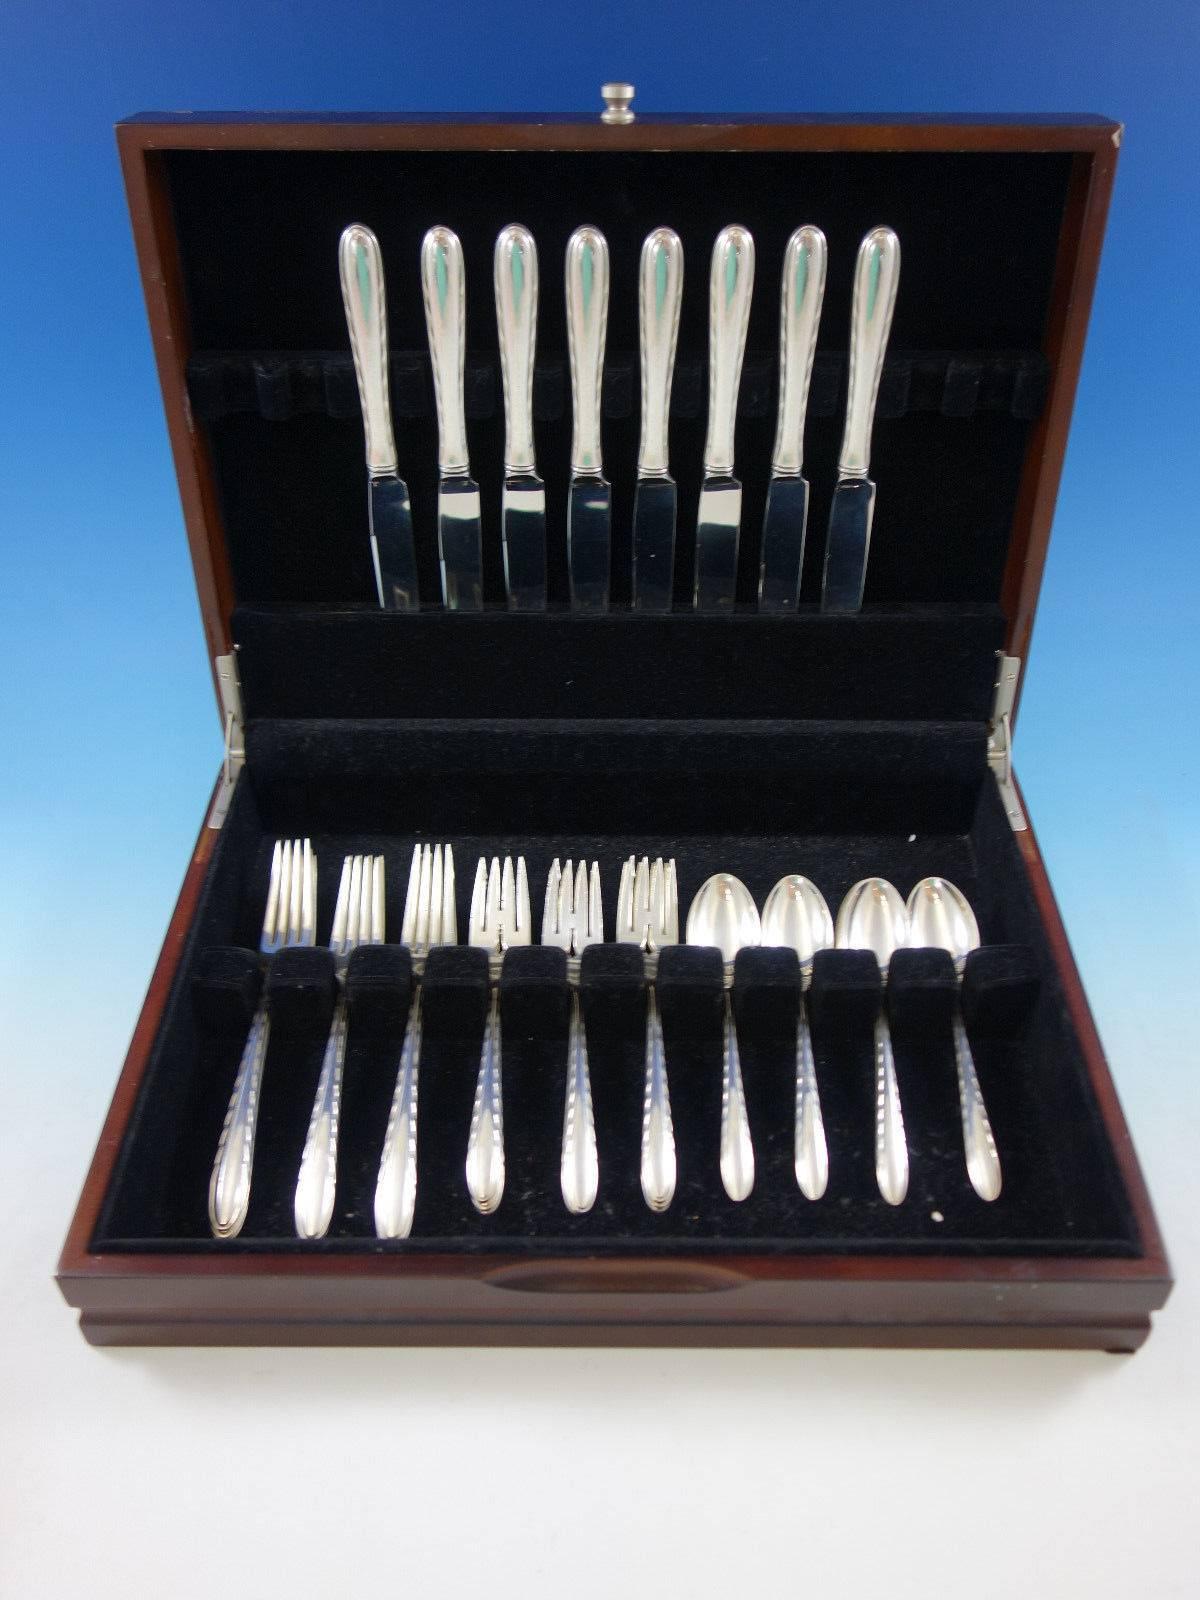 Silver flutes by Towle sterling silver flatware set, 32 pieces. This set includes: 

eight knives, 9